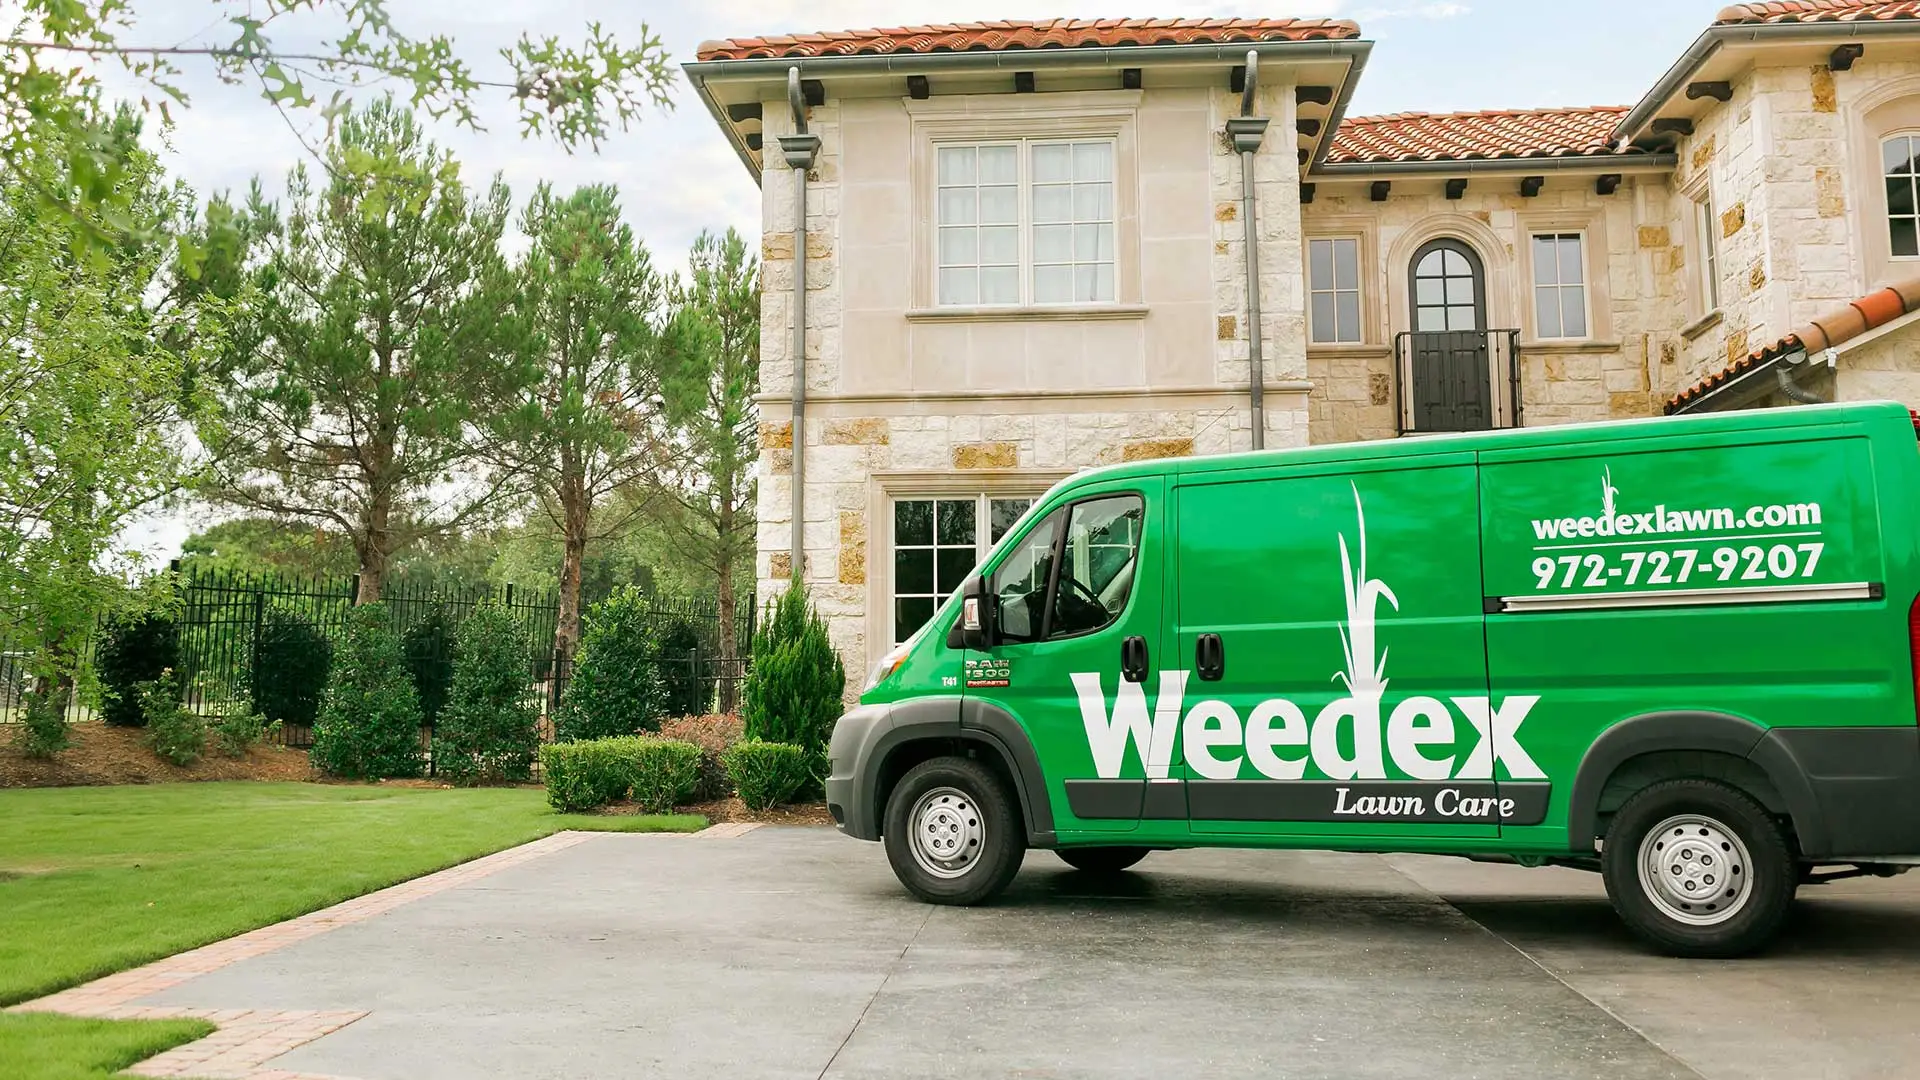 Weedex Lawn Care service vehicle in front of a home in Dallas, TX.